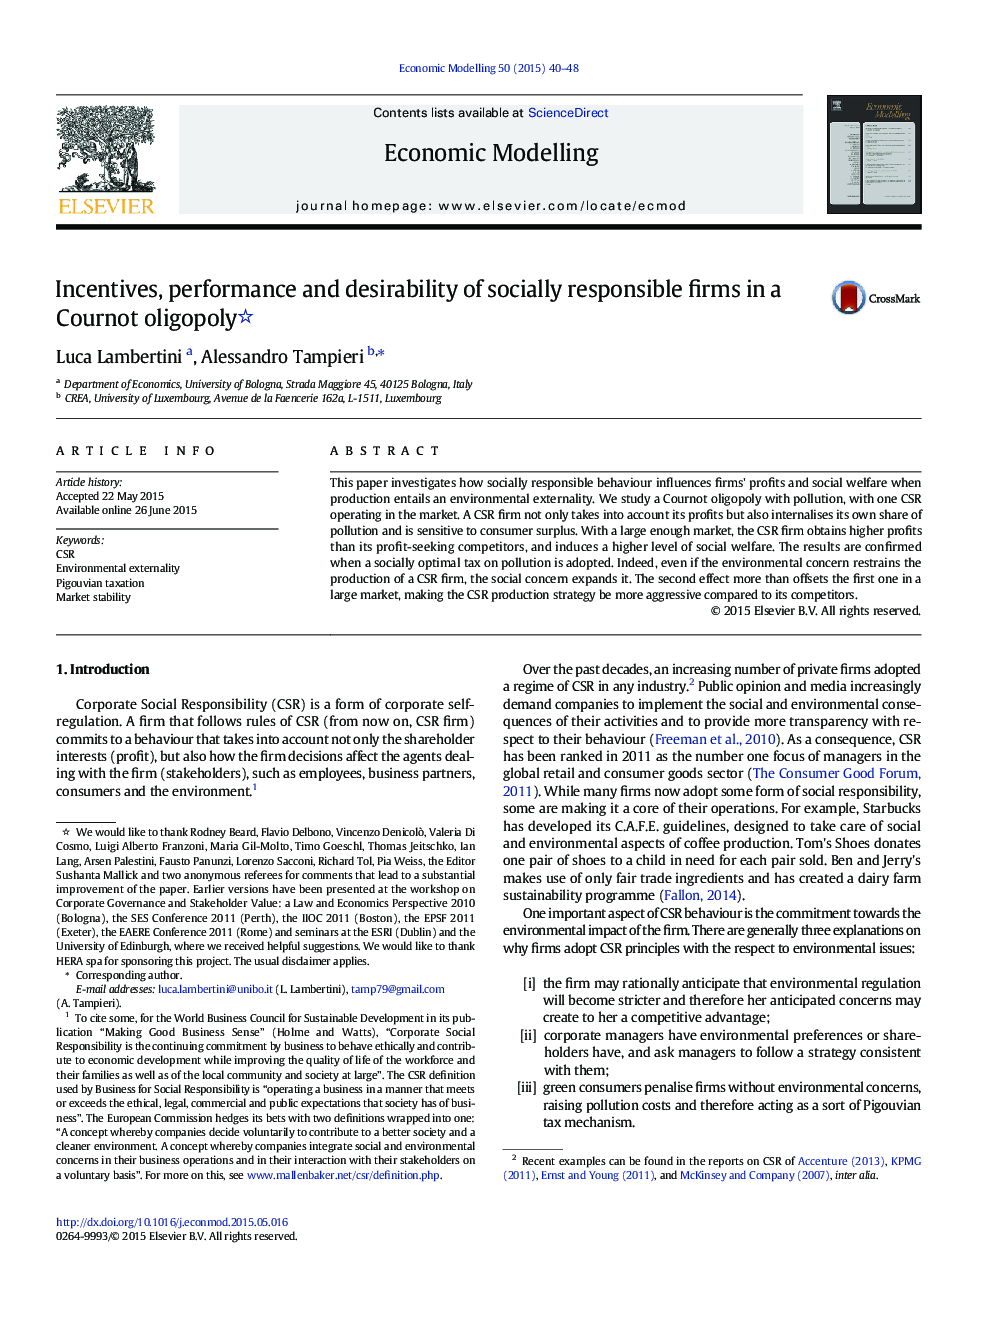 Incentives, performance and desirability of socially responsible firms in a Cournot oligopoly